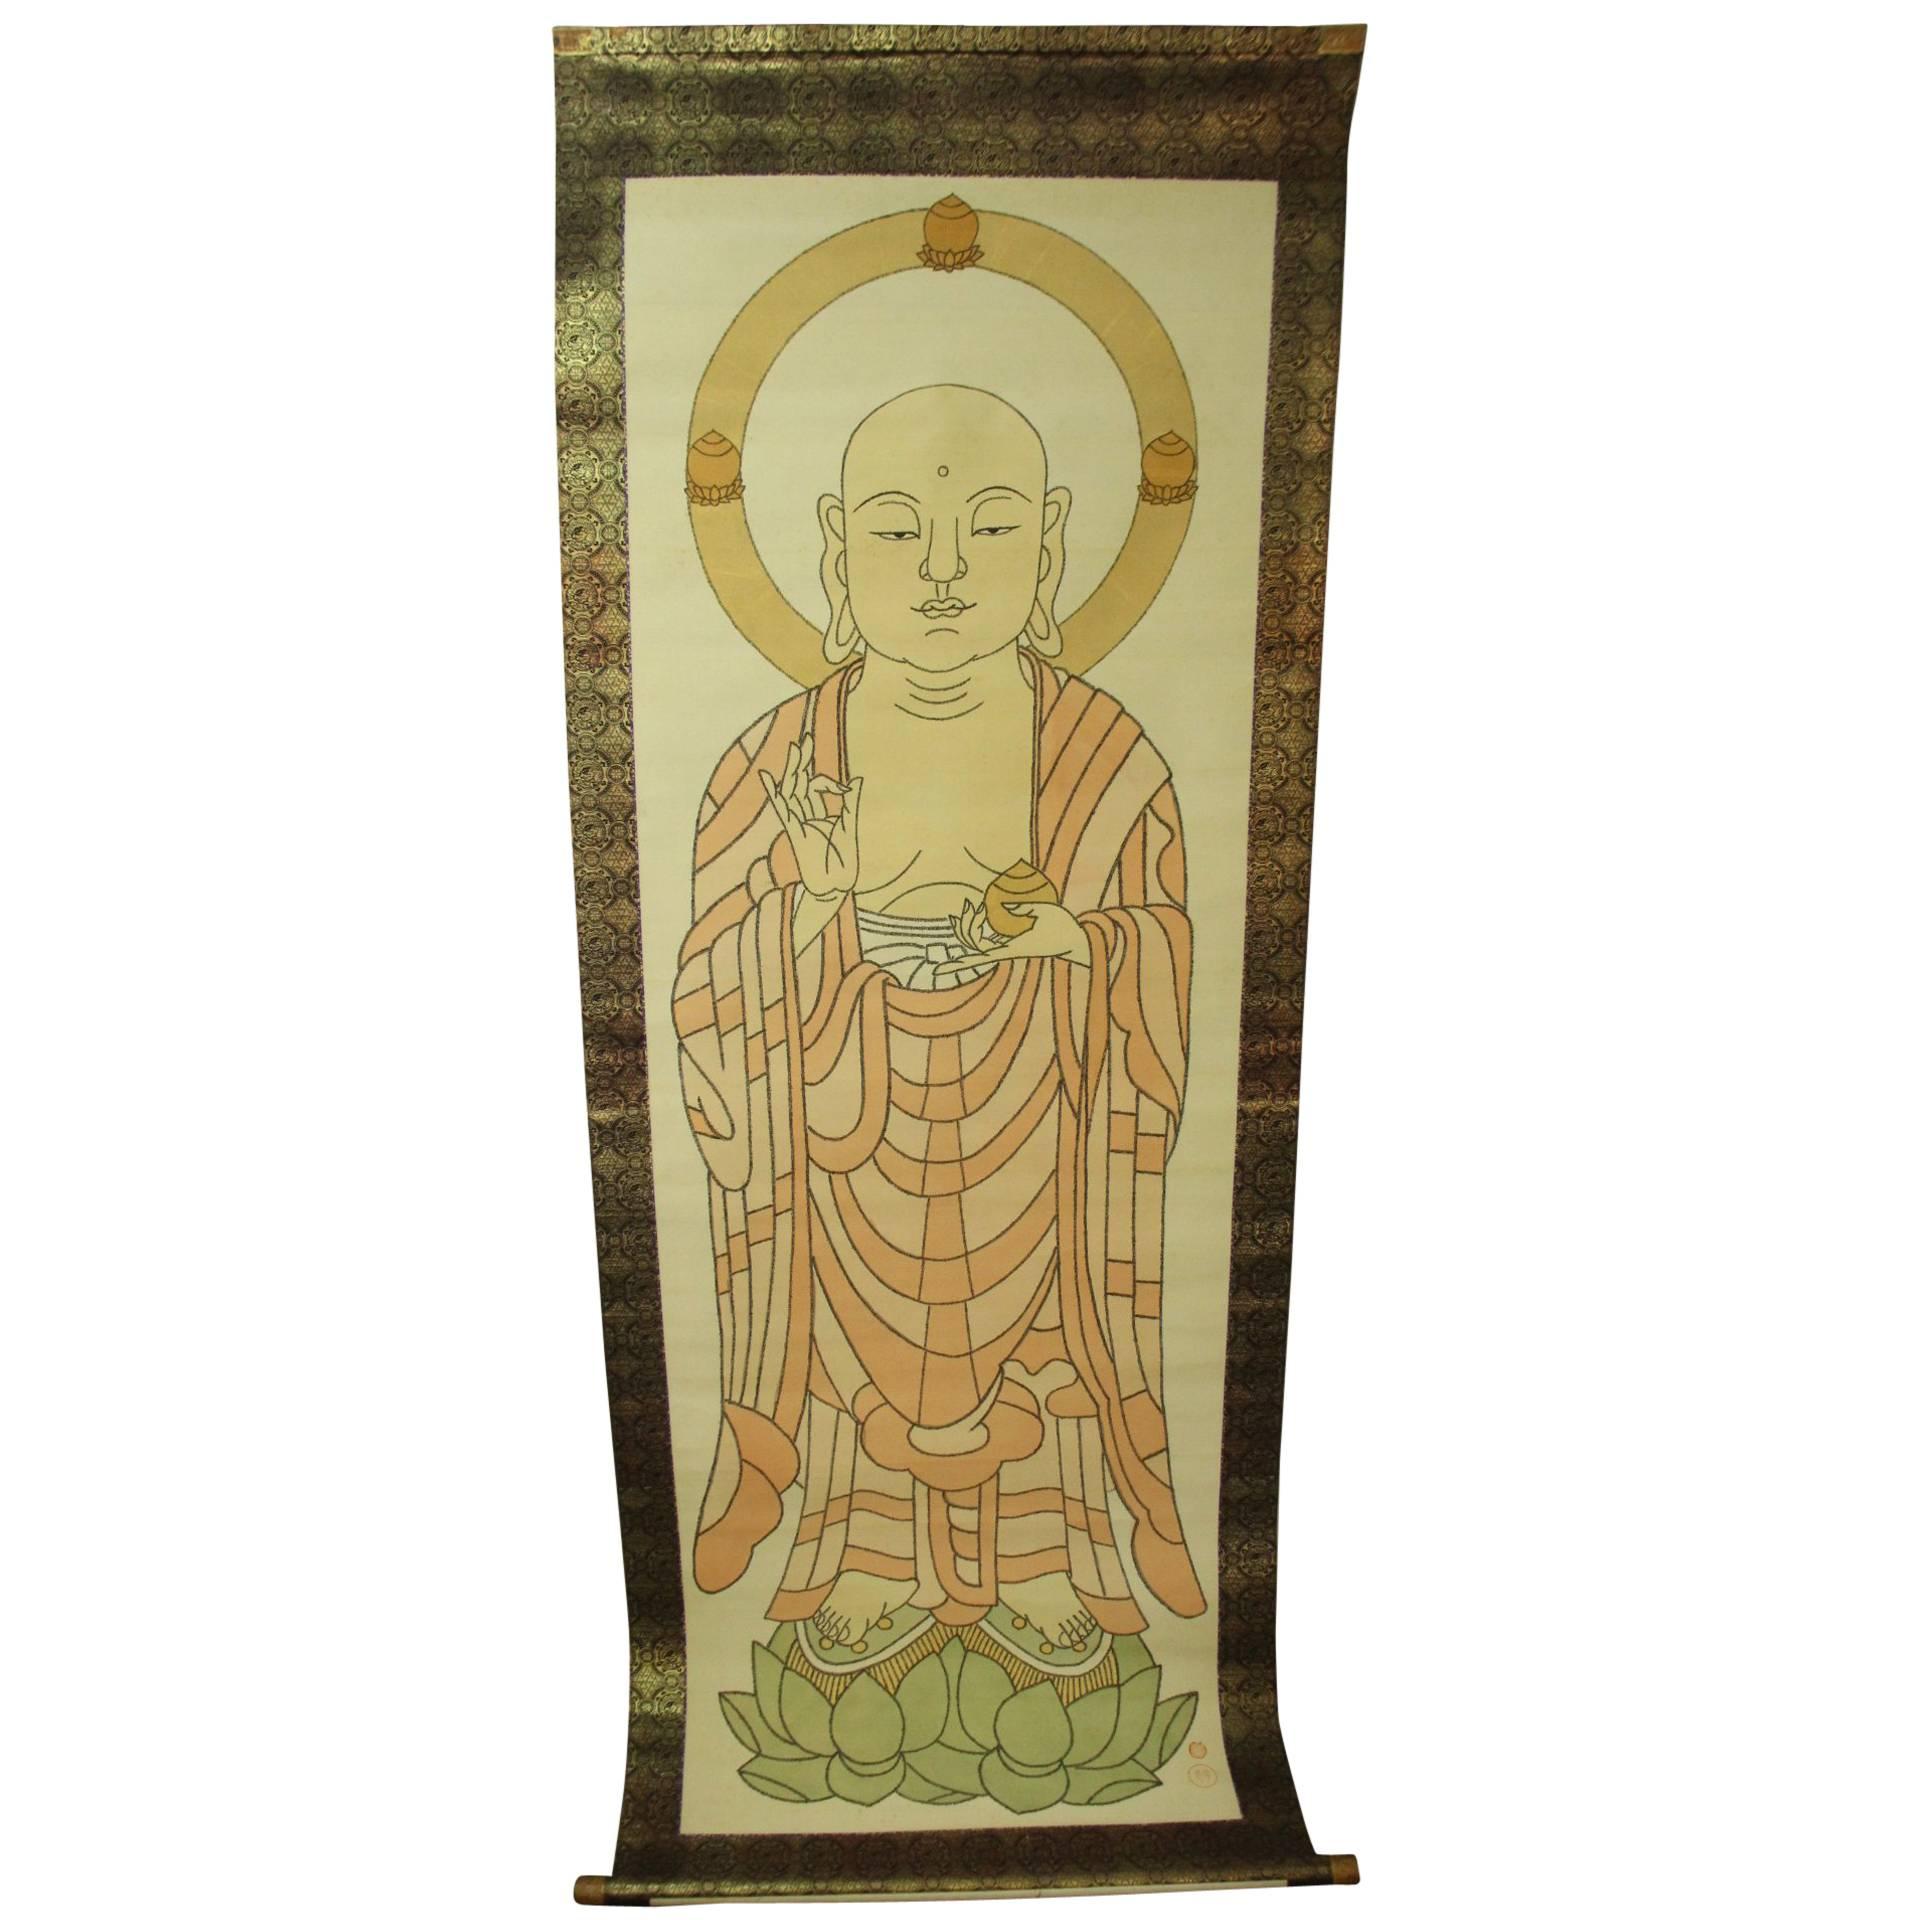 Japan Important Massive Hand Painting Buddha Temple "Sutras" Silk Scroll, 19thc